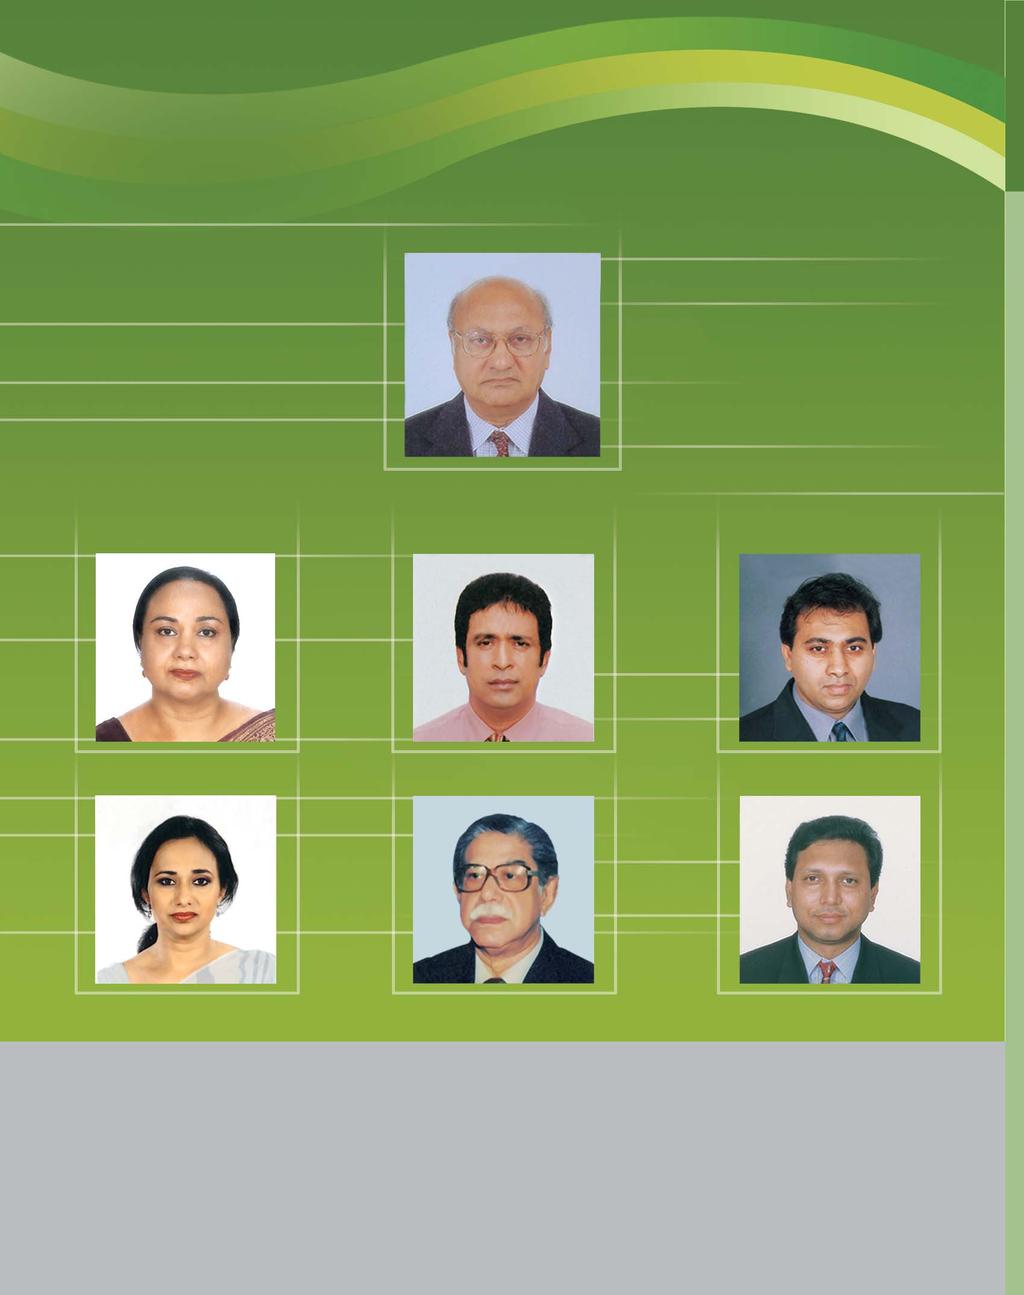 2 Annual Report 2009 Corporate Management Board of Directors Mr. M Anis Ud Dowla Chairman & Managing Director Mrs. Najma Dowla Director Dr. F H Ansarey Director Dr. Arif Dowla Director Ms.